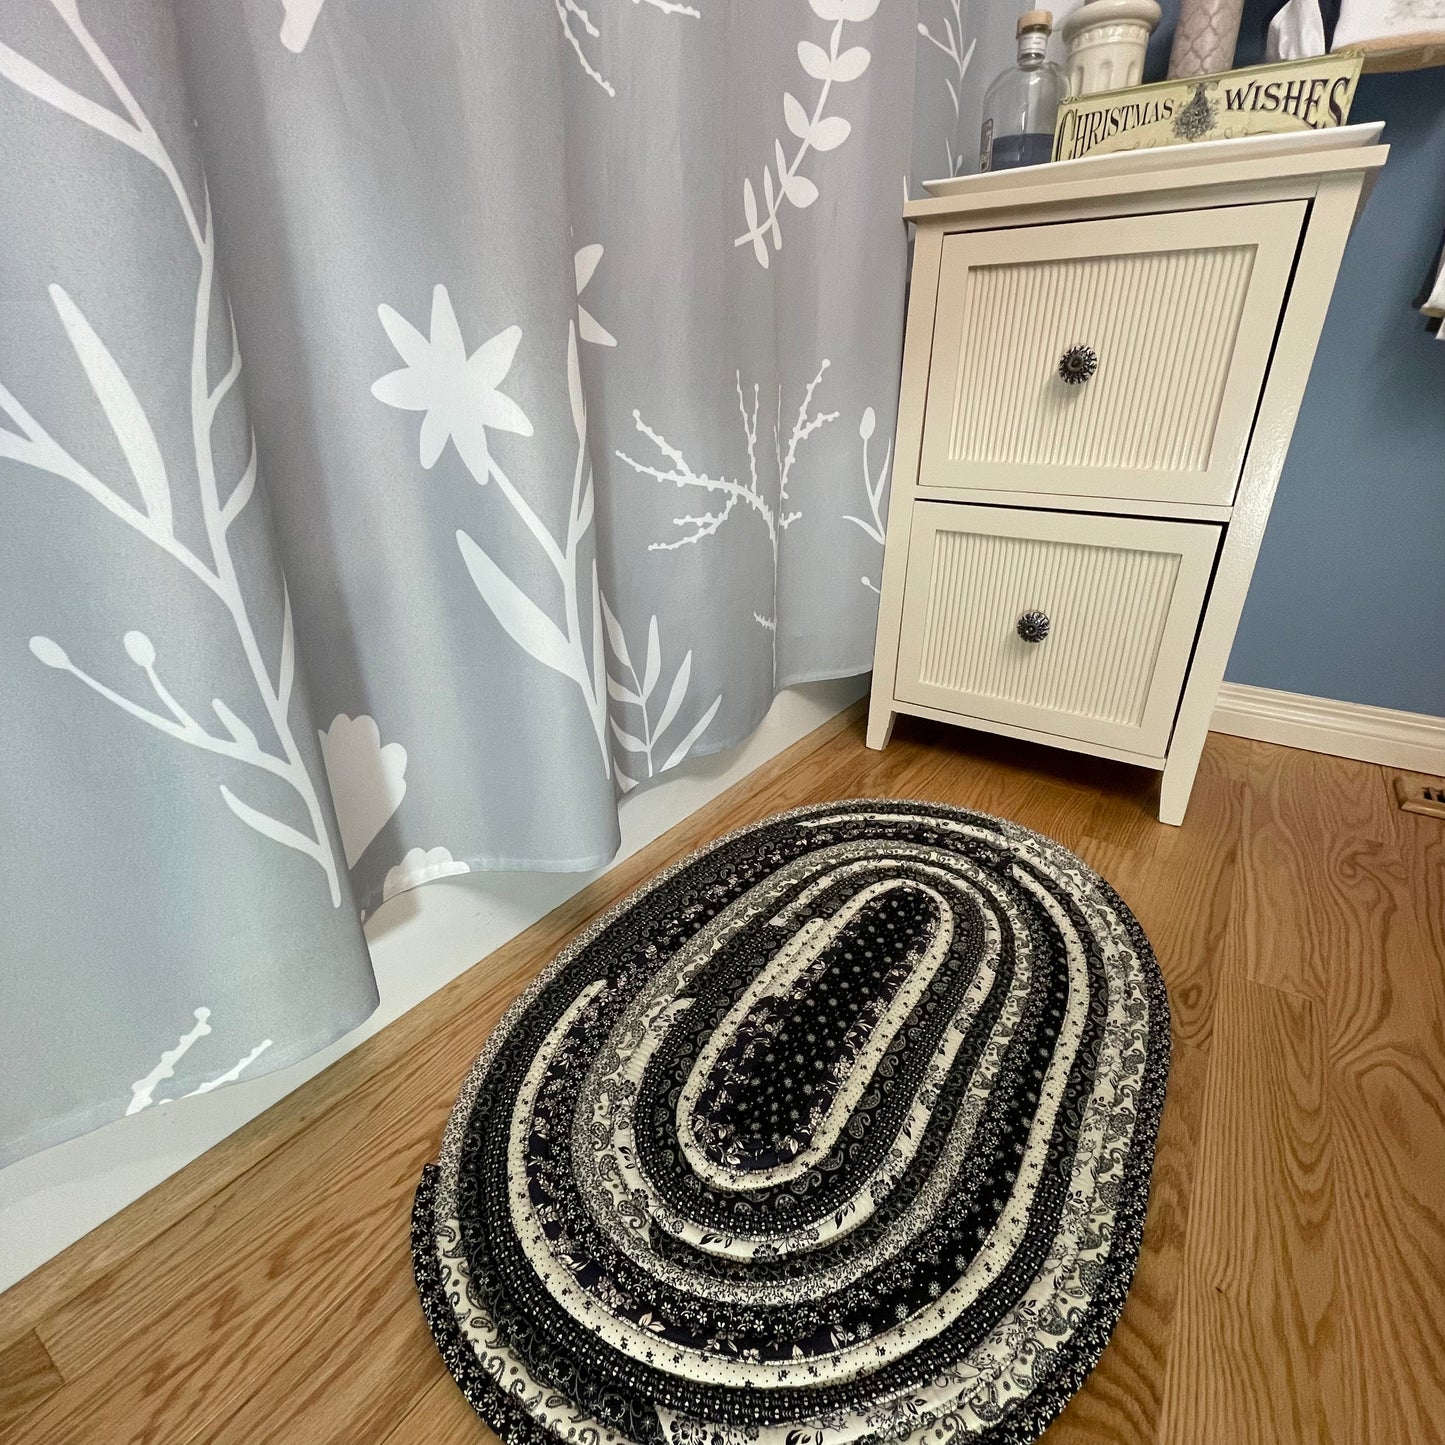 Black and Cream Kitchen Sink Accent Rug, Washable Cotton Rug For Kitchen or Bath